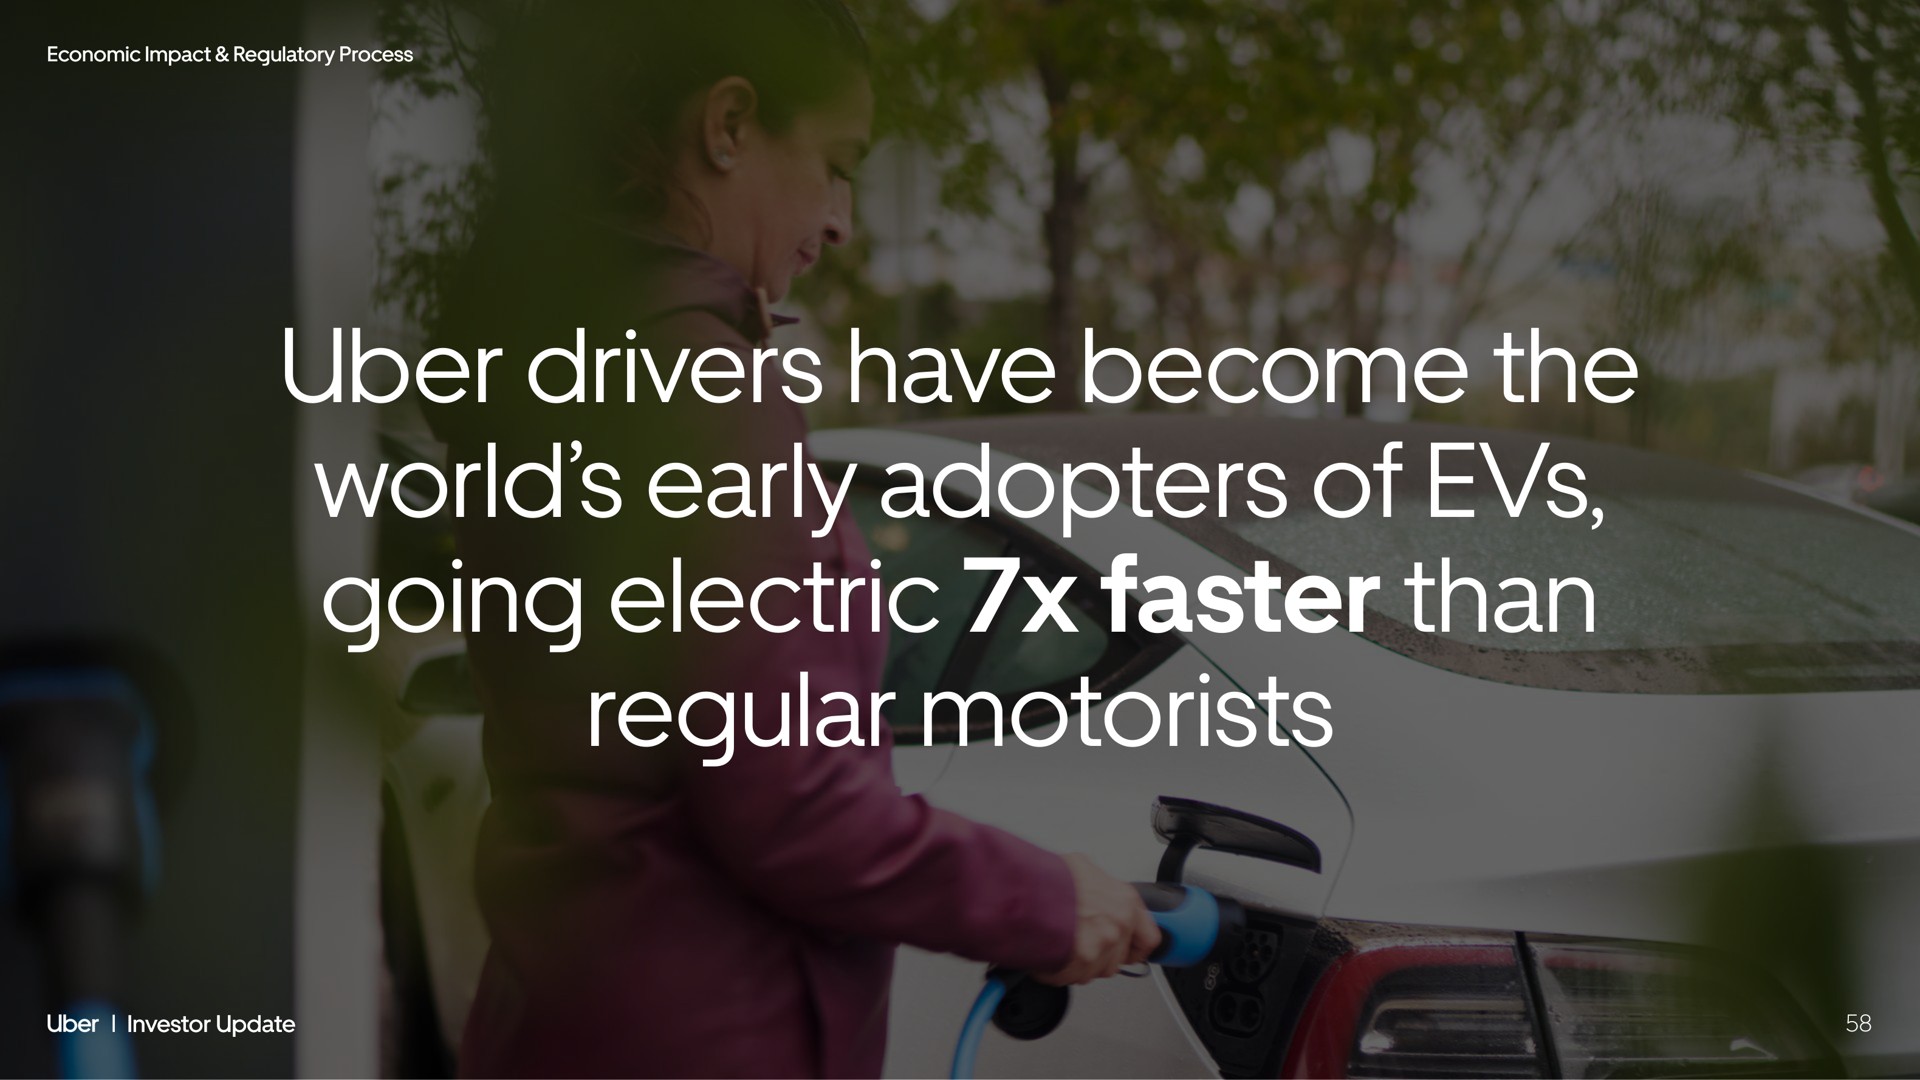 drivers have become the world early adopters of going electric faster than regular motorists worlds | Uber